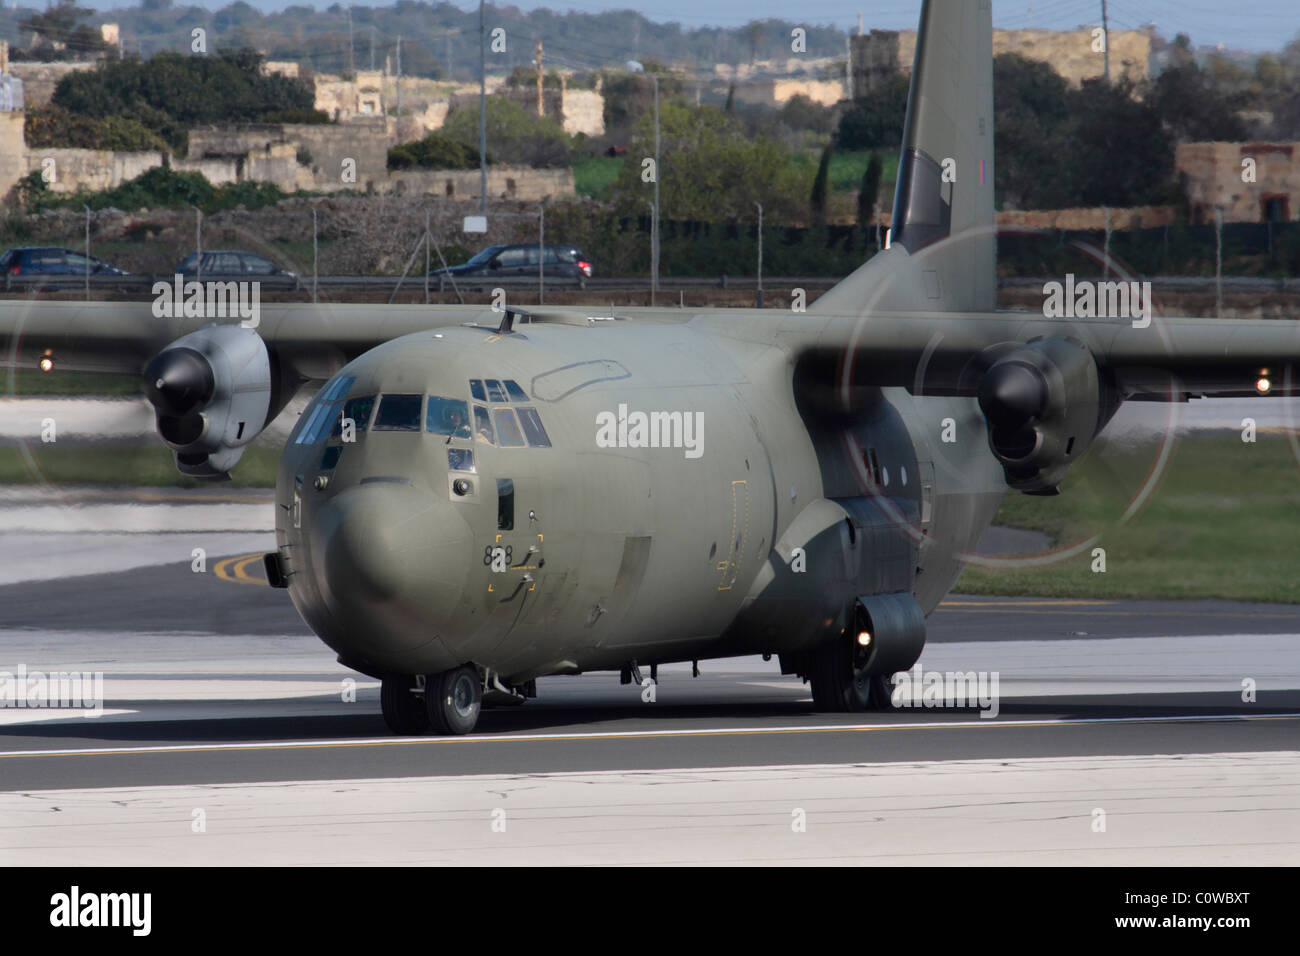 RAF Lockheed Martin C-130J Hercules military transport plane lining up on the runway for departure. Close up front view with emphasis on propellers. Stock Photo